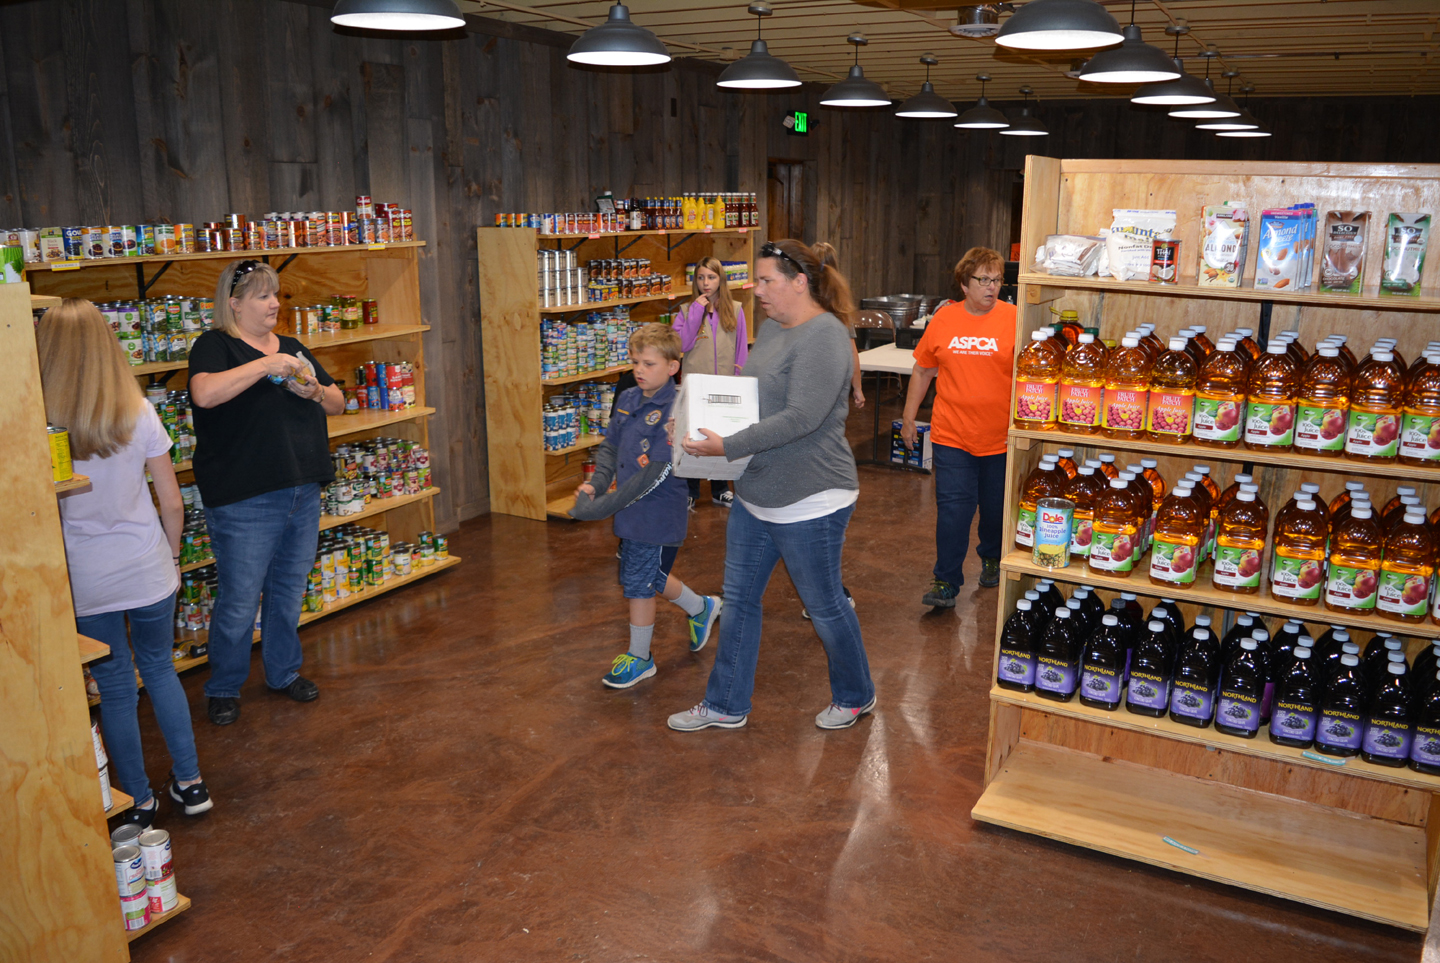 Oxford-Orion FISH’s new pantry at 1060 S. Lapeer Rd. opened for business on Monday. Photo by C.J. Carnacchio.